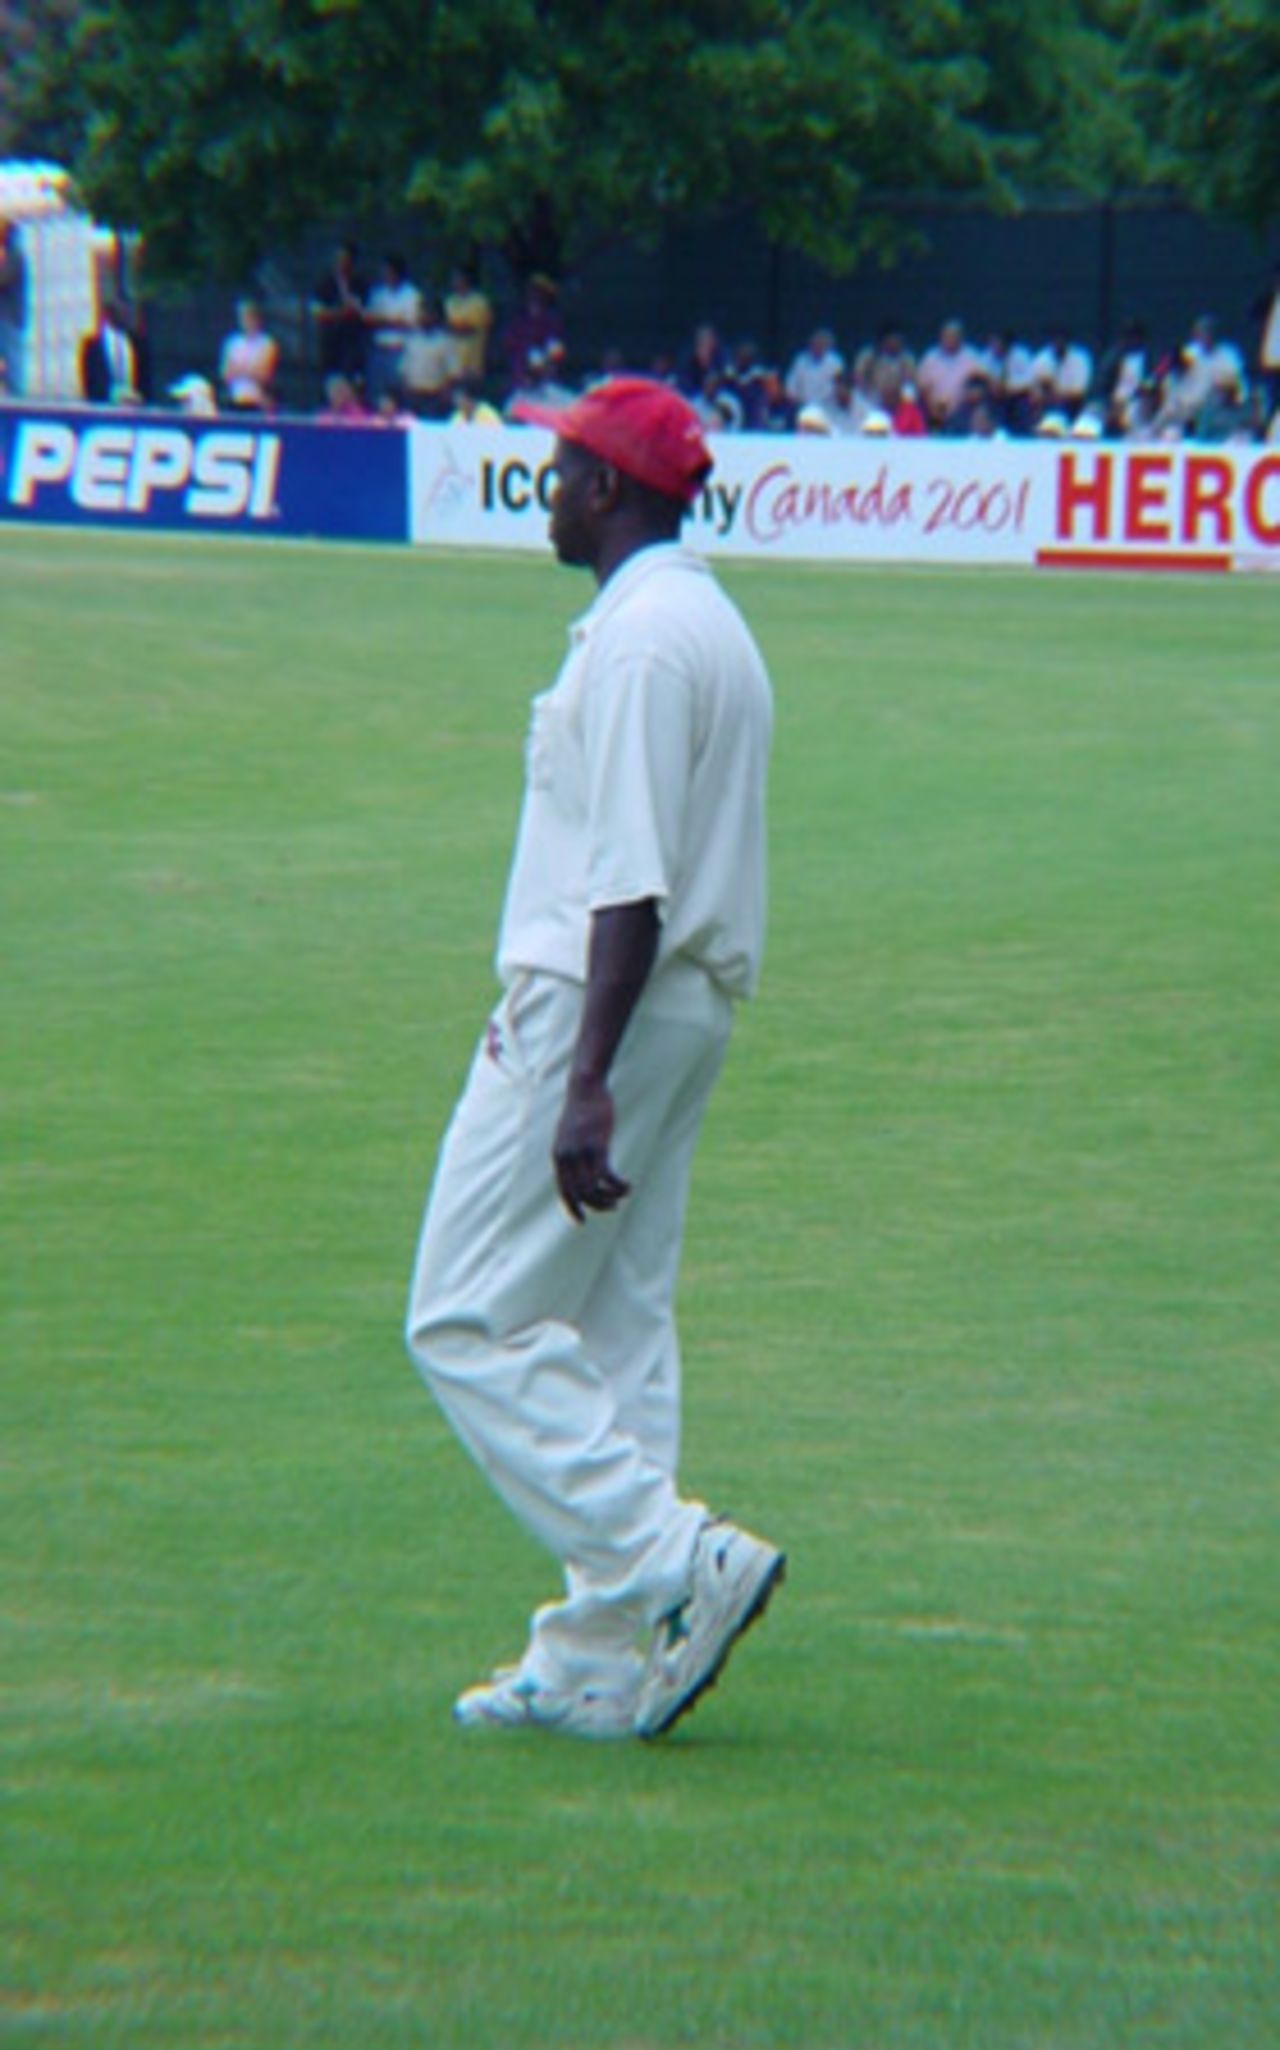 Canadian  Desmond Chumney looks towards the middle from the outfield. ICC Trophy 2001: Canada v Scotland, Toronto Cricket, Skating and Curling Club, 17 July 2001.